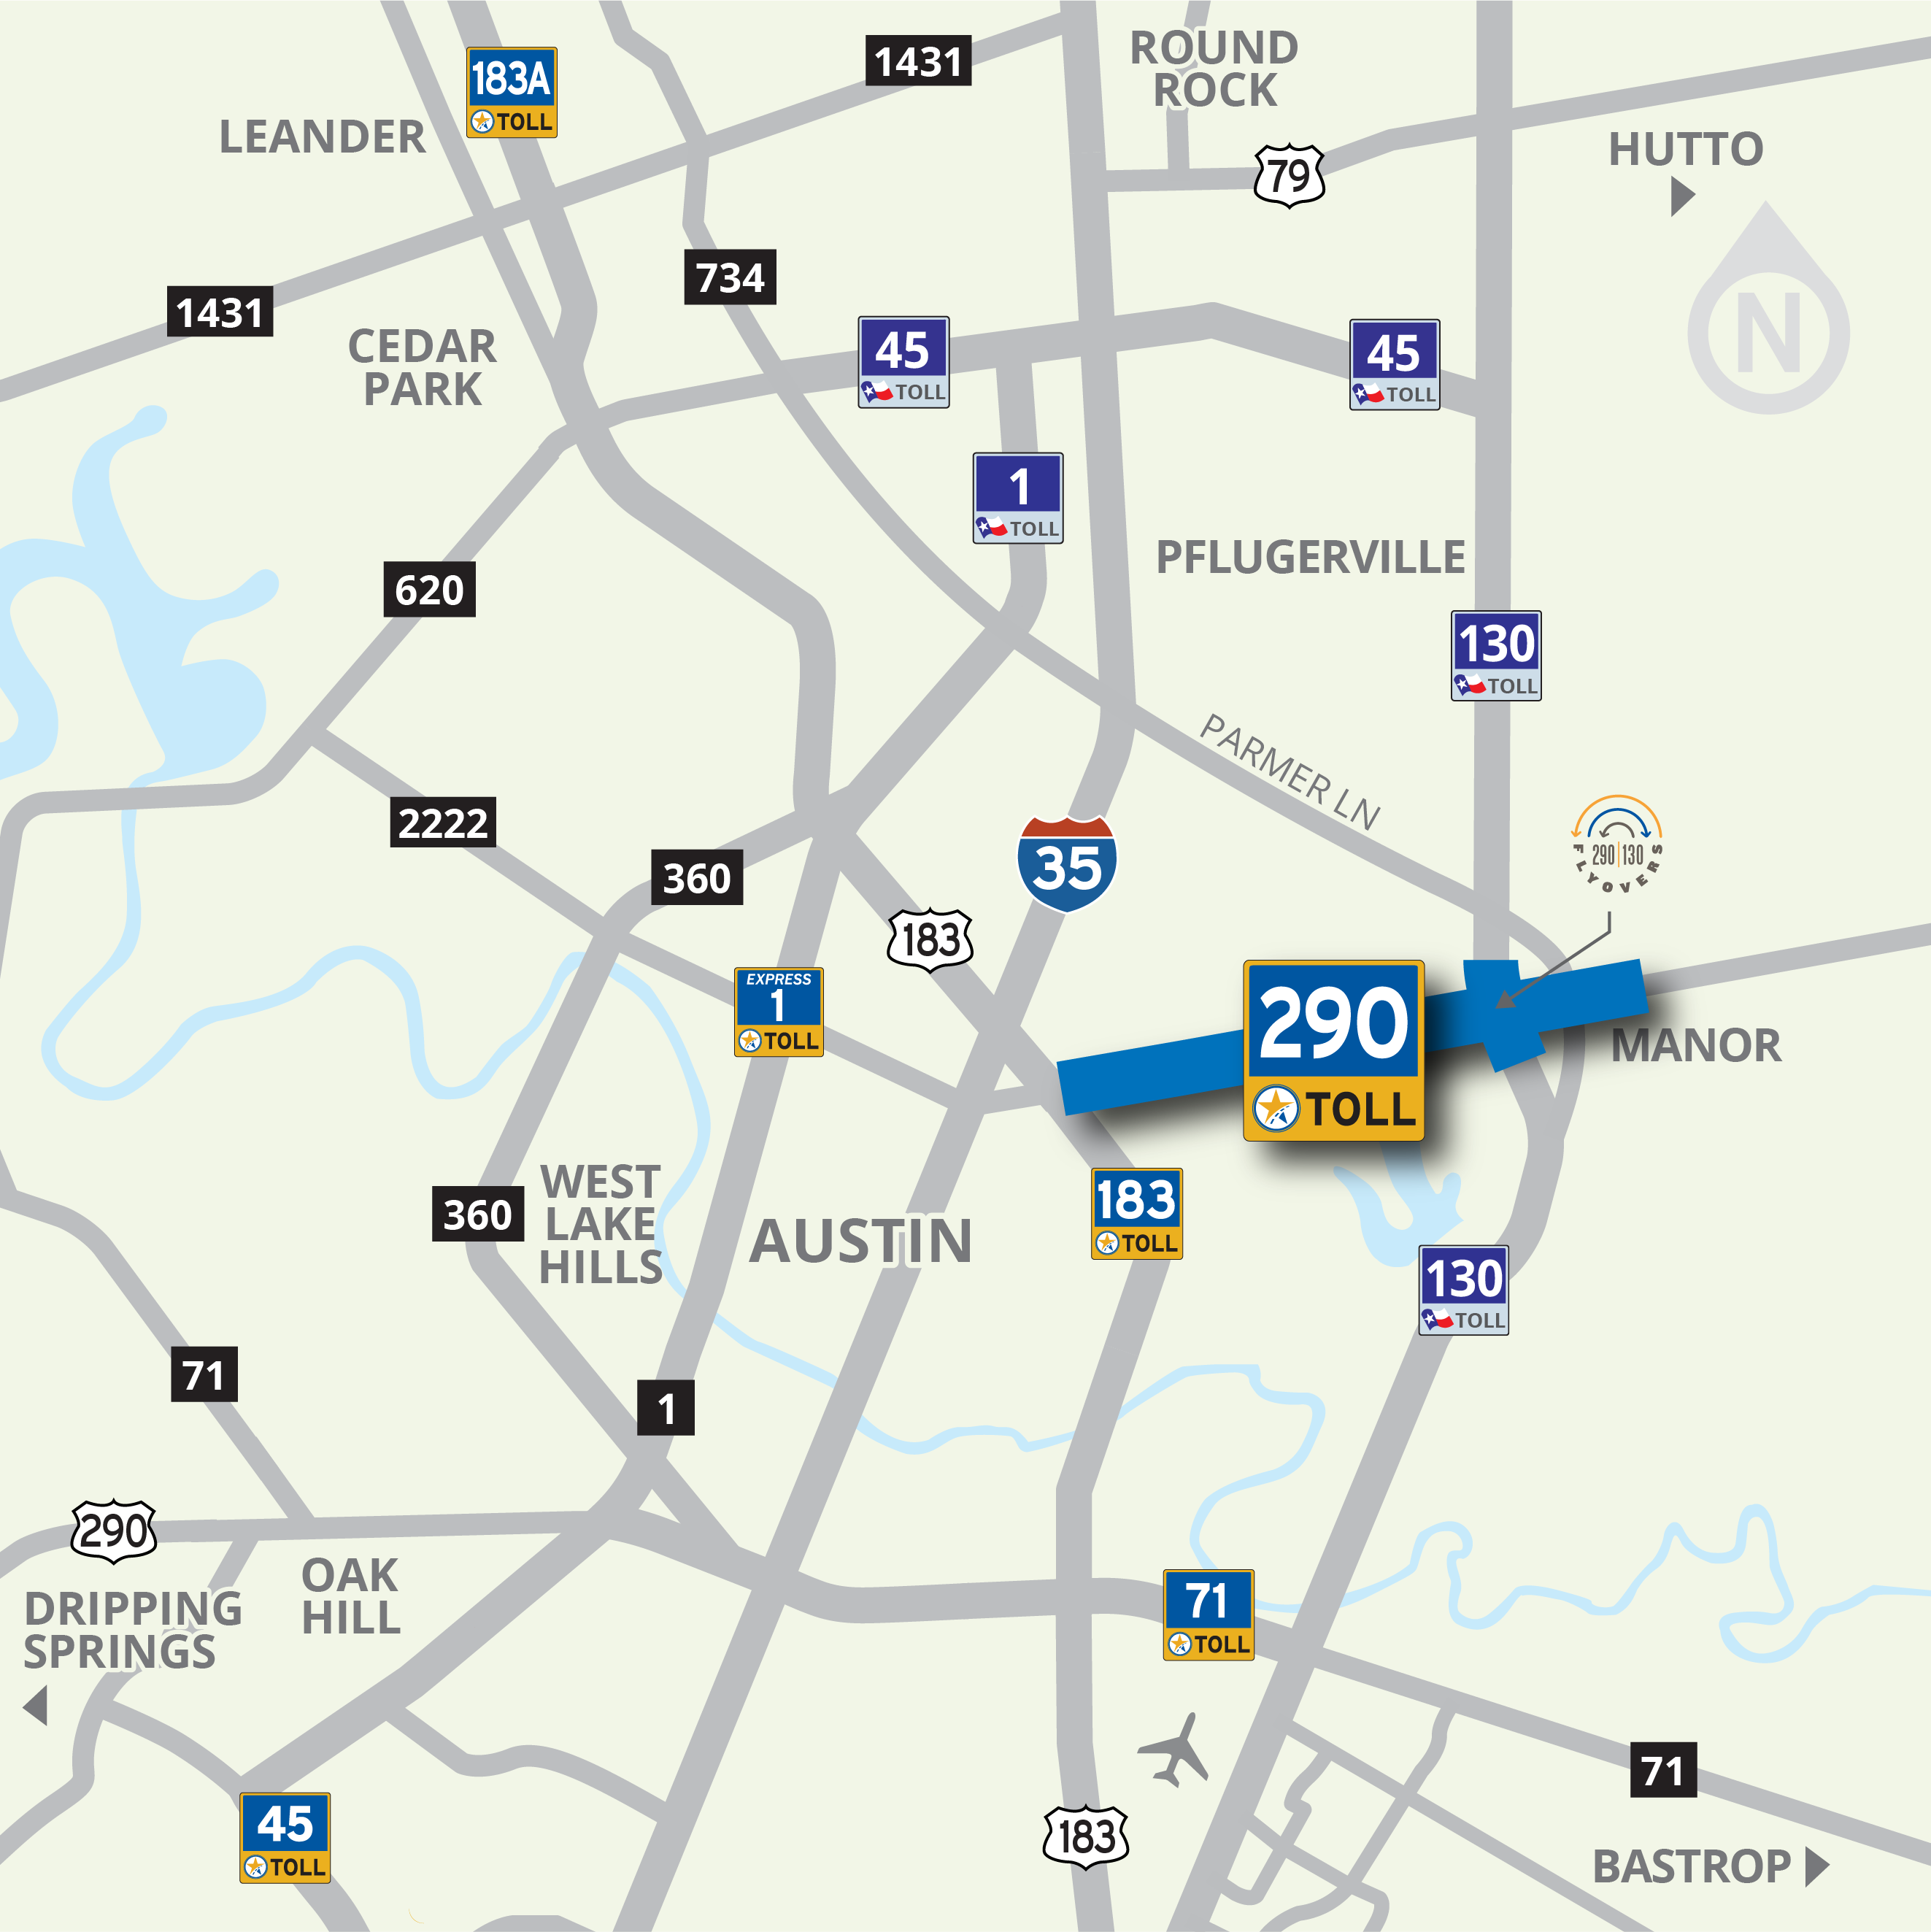 290 Toll Map